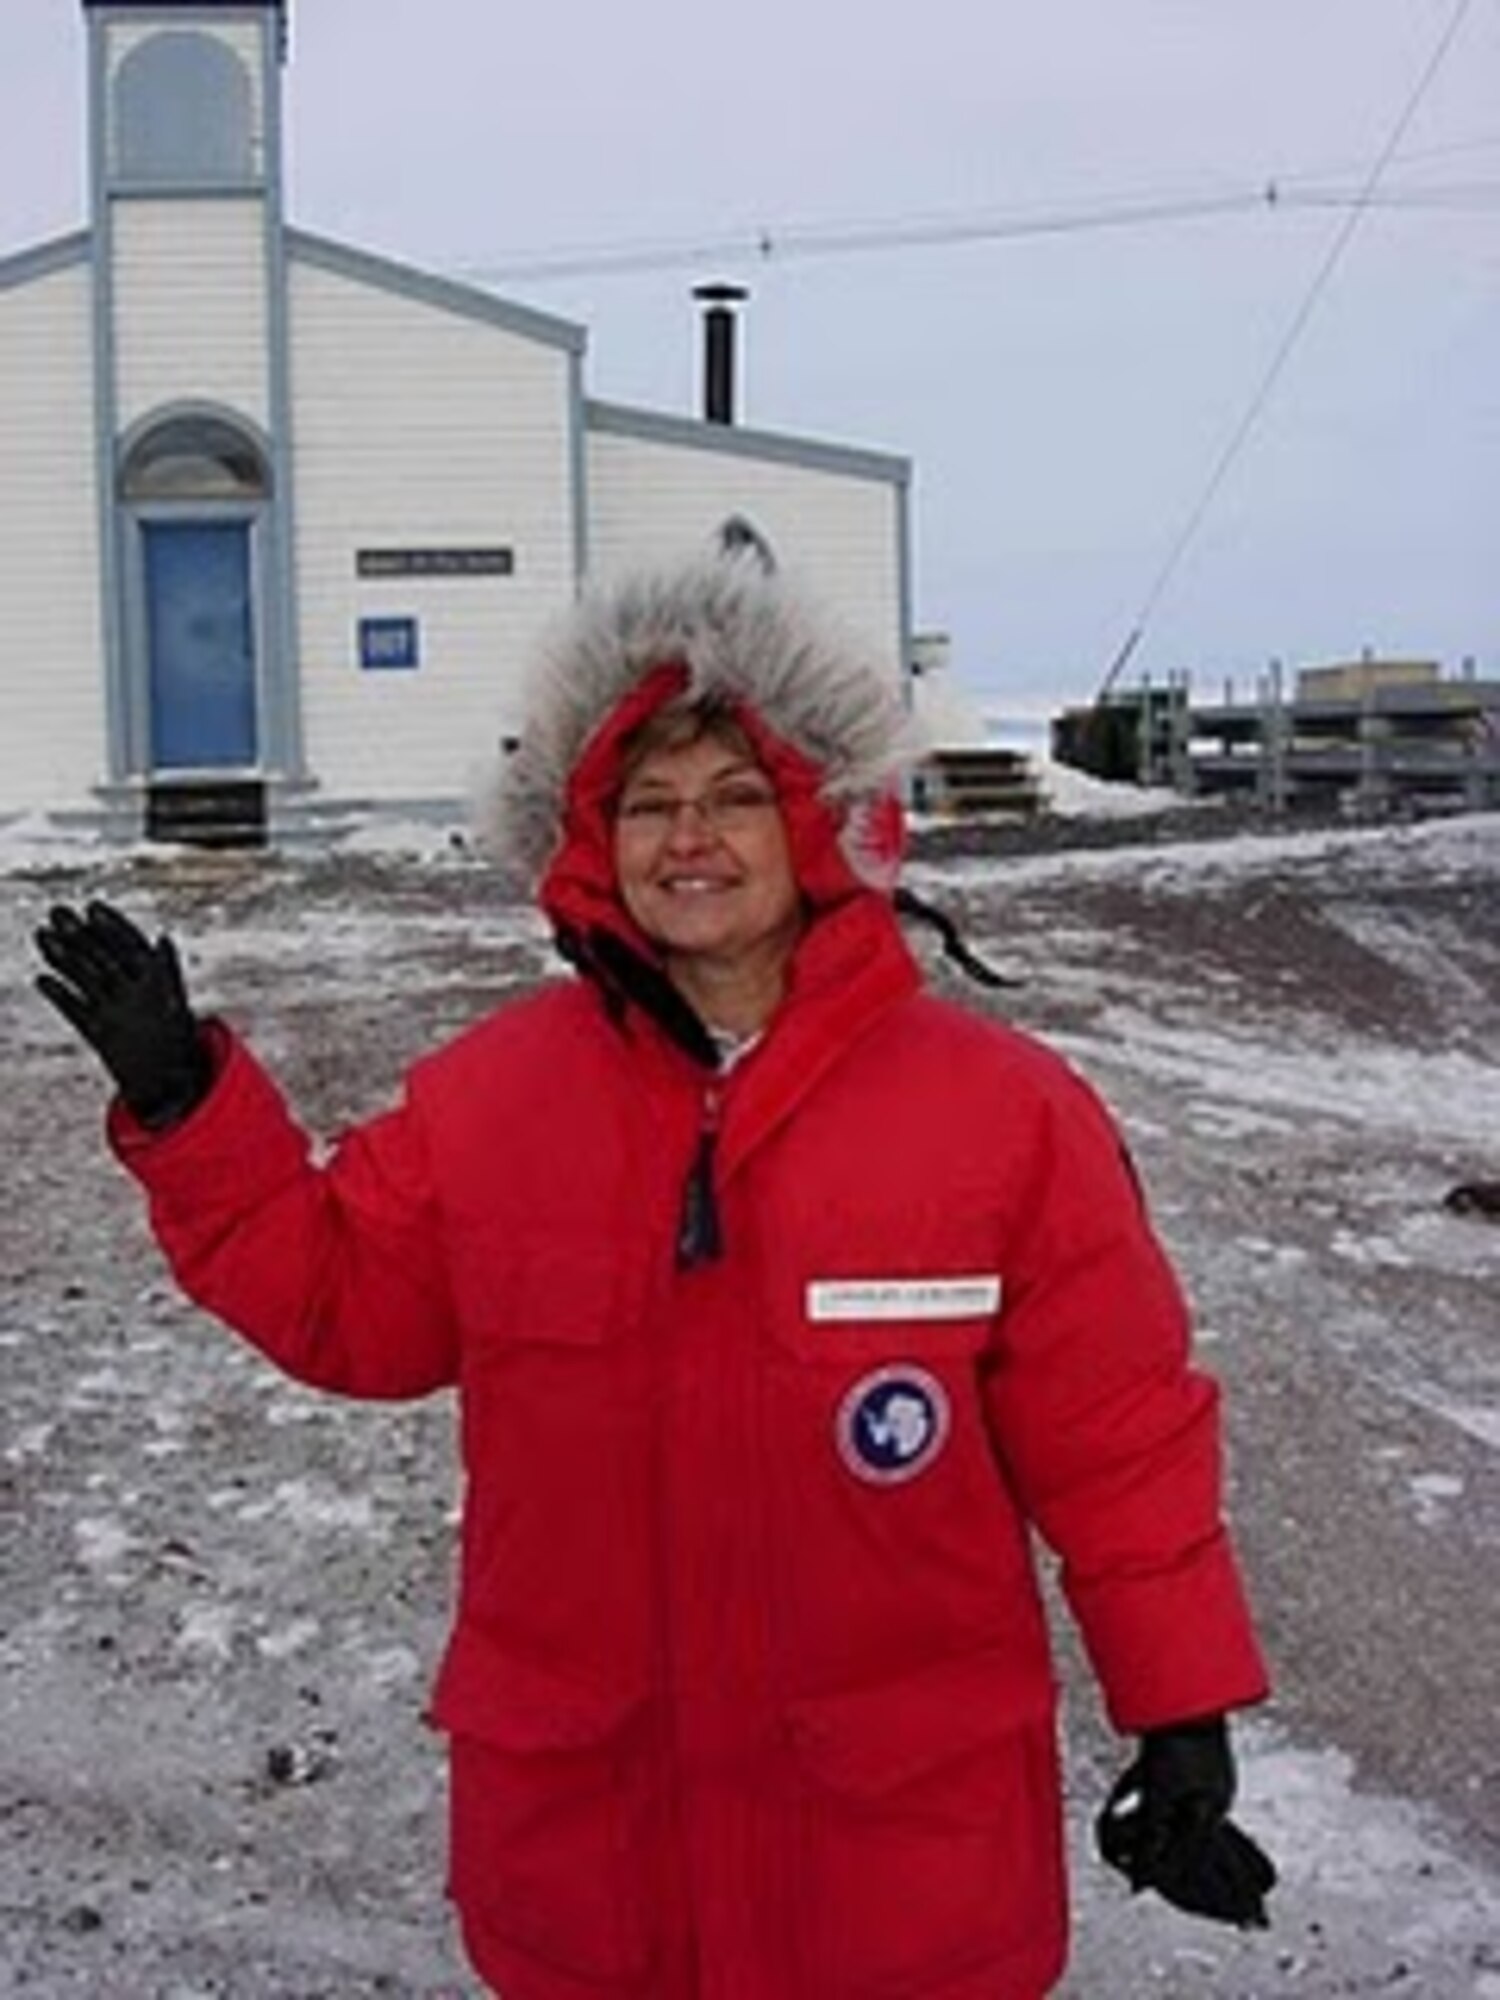 U.S. Air Force Chaplain (Major) Laura Adelia poses in front of Chapel of the Snow, McMurdo Station, Antarctica, where she became the first female chaplain on station during her 60-day tour Oct. 3, 2010. She will be providing spiritual support to the various military personnel assigned to “Operation Deep Freeze,”  (courtesy photo)